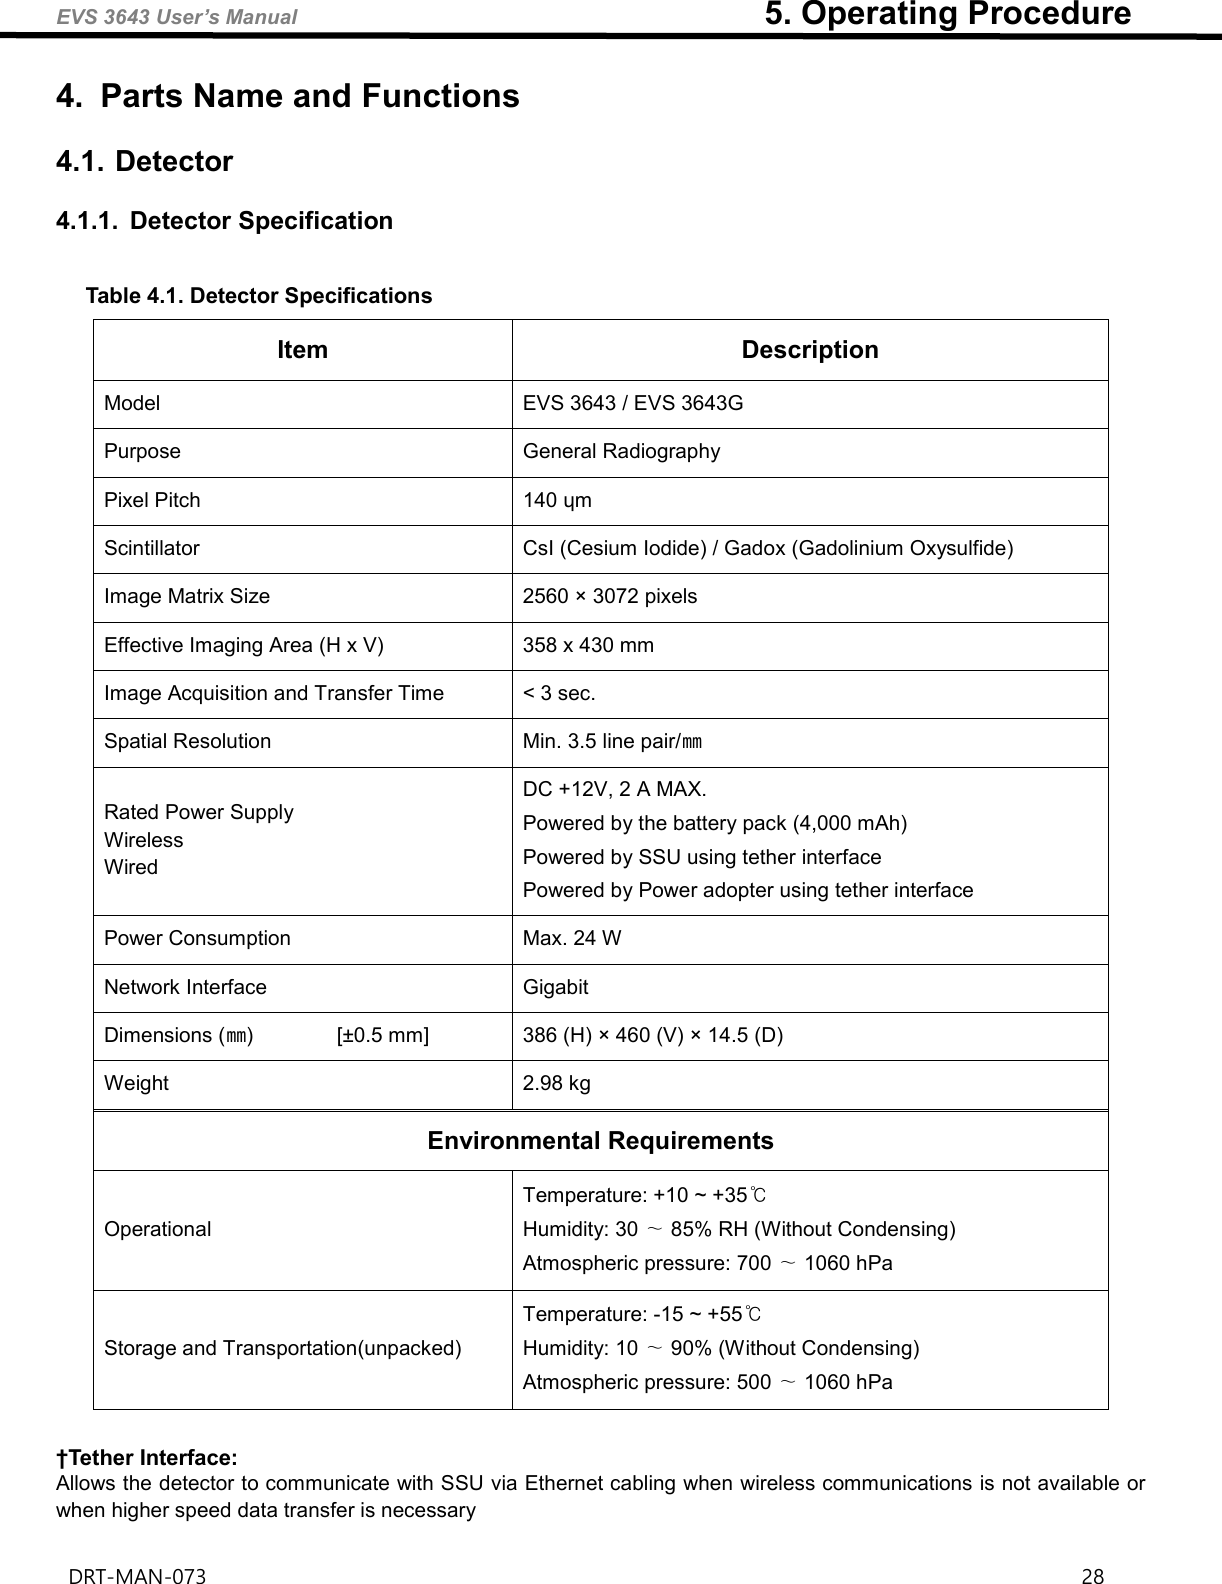 EVS 3643 User’s Manual                                                        5. Operating Procedure DRT-MAN-073                                                                                                                                                                28   4.  Parts Name and Functions 4.1. Detector 4.1.1.  Detector Specification  Table 4.1. Detector Specifications Item Description Model EVS 3643 / EVS 3643G Purpose General Radiography Pixel Pitch 140 ɥm Scintillator CsI (Cesium Iodide) / Gadox (Gadolinium Oxysulfide) Image Matrix Size 2560 × 3072 pixels Effective Imaging Area (H x V) 358 x 430 mm Image Acquisition and Transfer Time &lt; 3 sec. Spatial Resolution Min. 3.5 line pair/㎜ Rated Power Supply Wireless   Wired DC +12V, 2 A MAX. Powered by the battery pack (4,000 mAh) Powered by SSU using tether interface Powered by Power adopter using tether interface Power Consumption Max. 24 W Network Interface Gigabit Dimensions (㎜)                [±0.5 mm] 386 (H) × 460 (V) × 14.5 (D) Weight 2.98 kg Environmental Requirements Operational Temperature: +10 ~ +35℃ Humidity: 30 ∼ 85% RH (Without Condensing) Atmospheric pressure: 700 ∼ 1060 hPa Storage and Transportation(unpacked) Temperature: -15 ~ +55℃ Humidity: 10 ∼ 90% (Without Condensing) Atmospheric pressure: 500 ∼ 1060 hPa  †Tether Interface: Allows the detector to communicate with SSU via Ethernet cabling when wireless communications is not available or when higher speed data transfer is necessary   